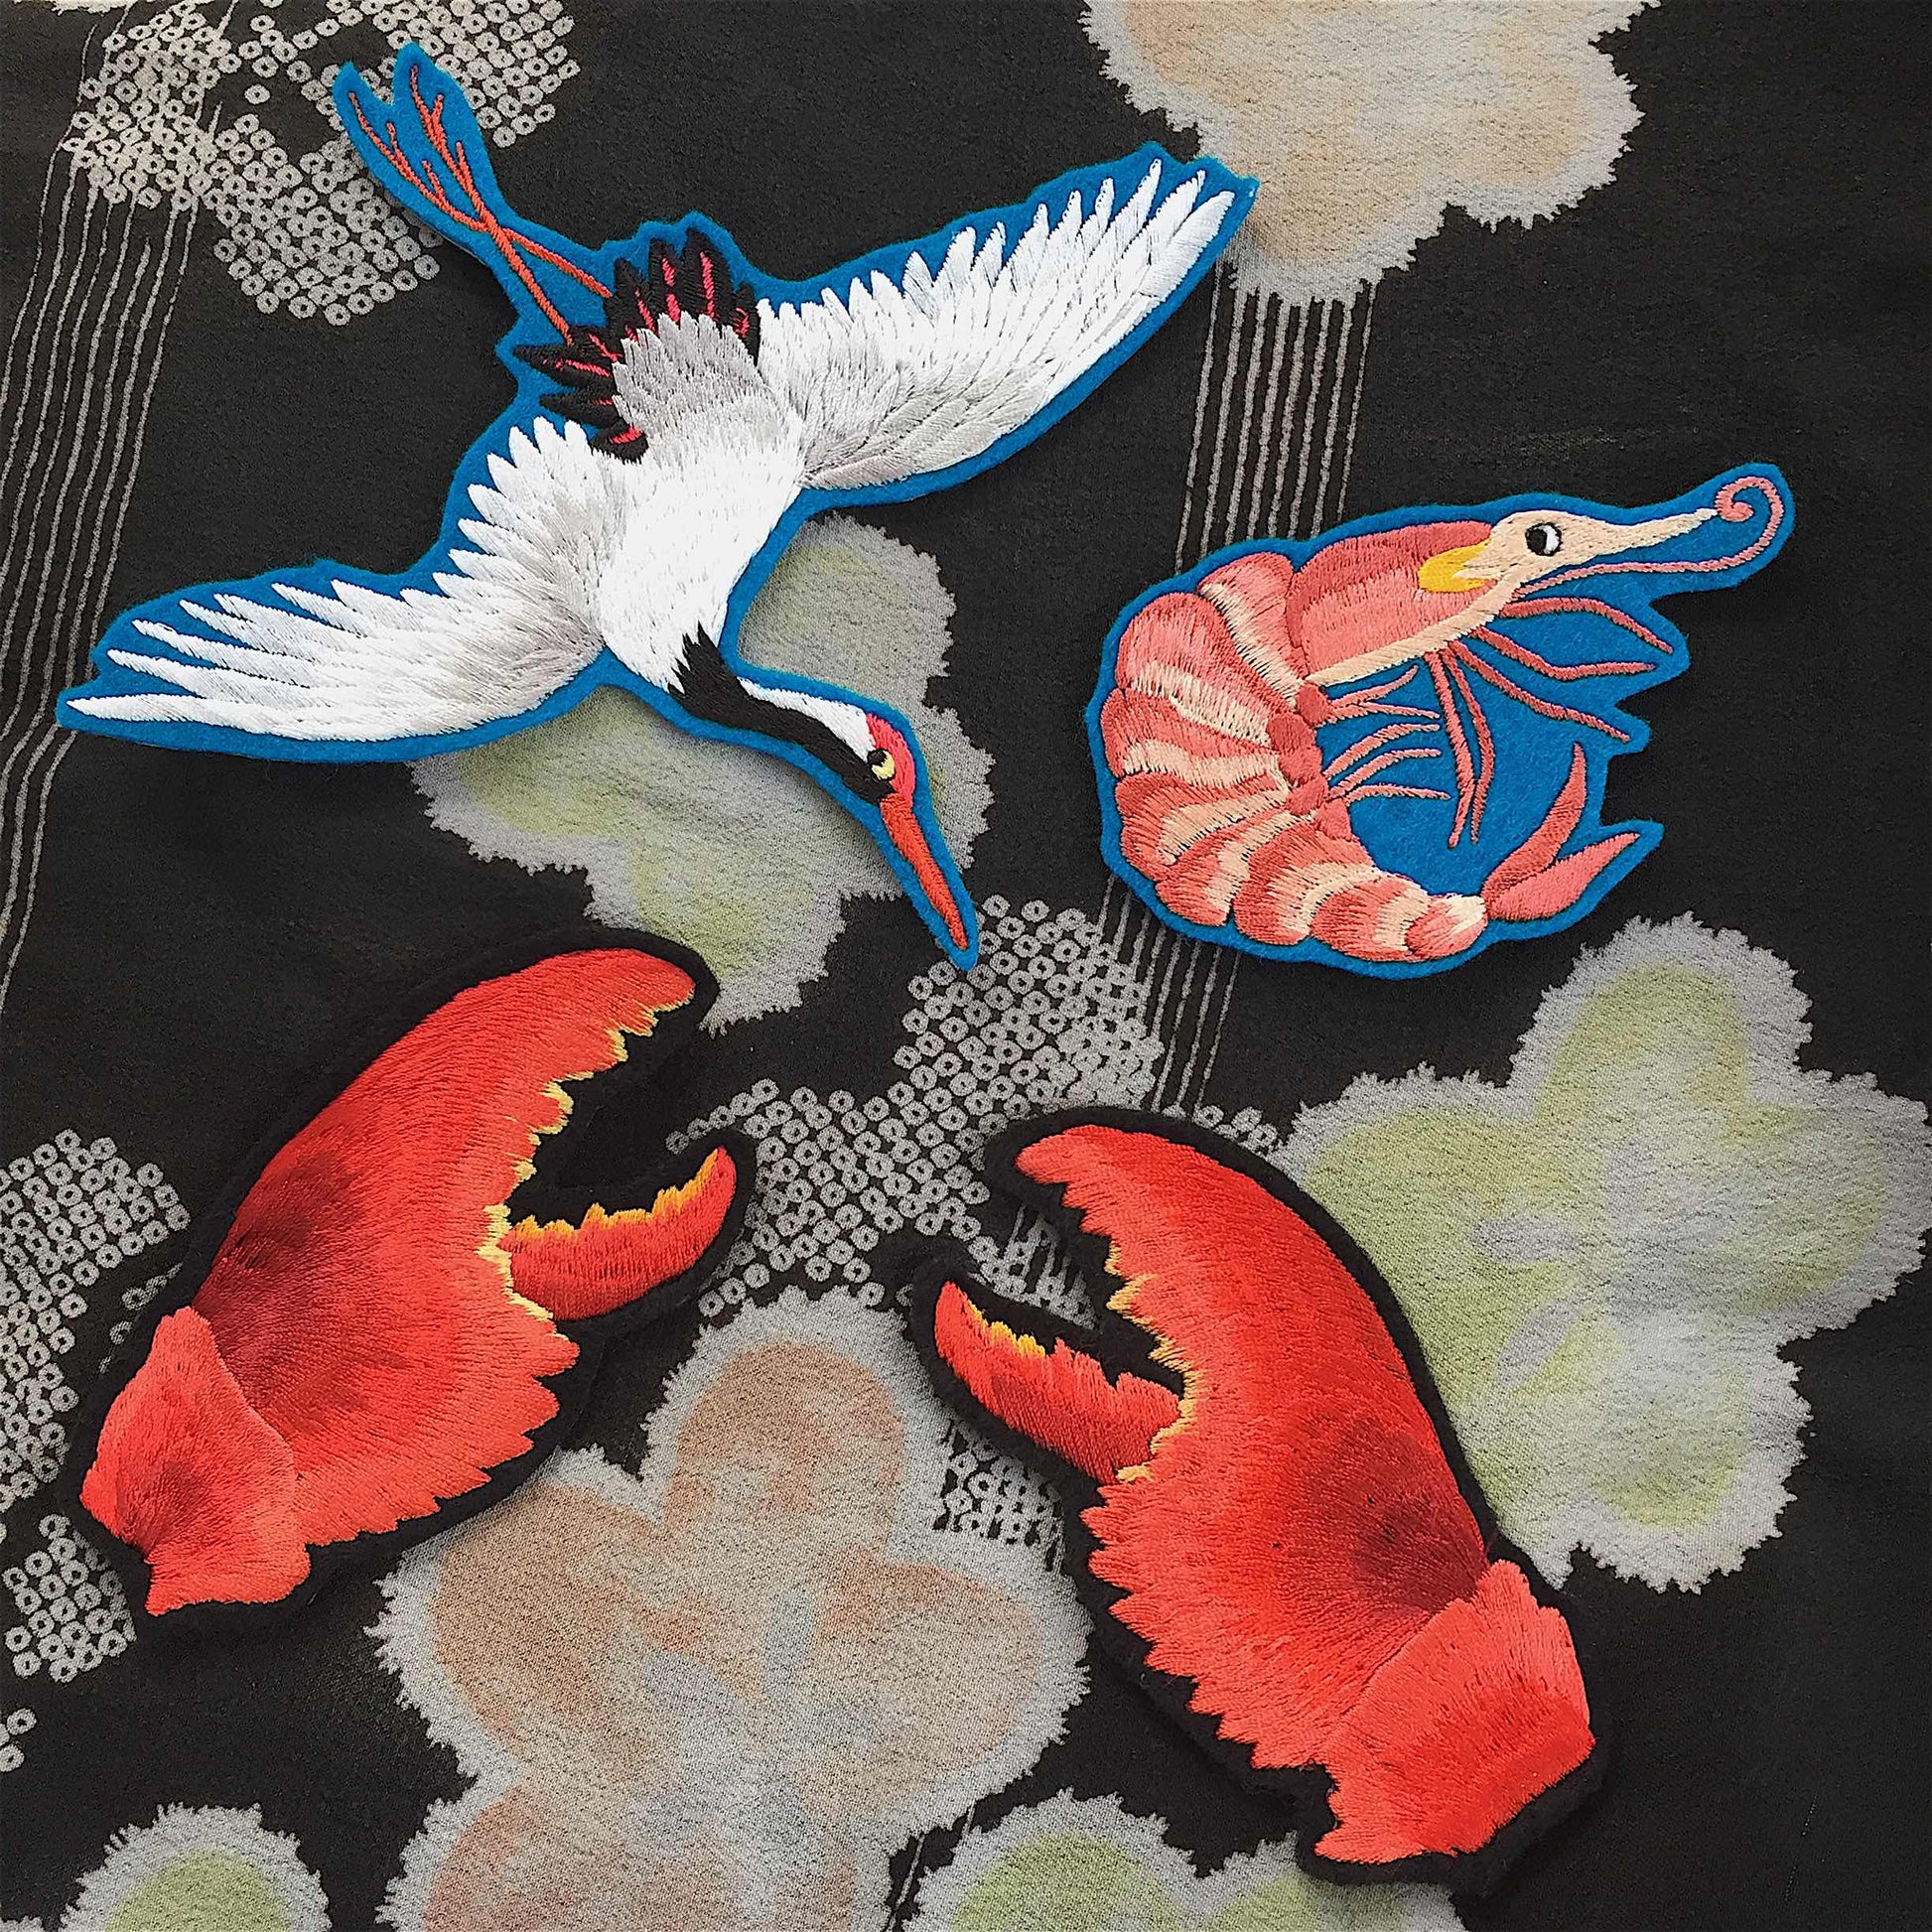 Small selection of Ellie Mac embroidered patches including a crane, prawn and a pair of lobster claws